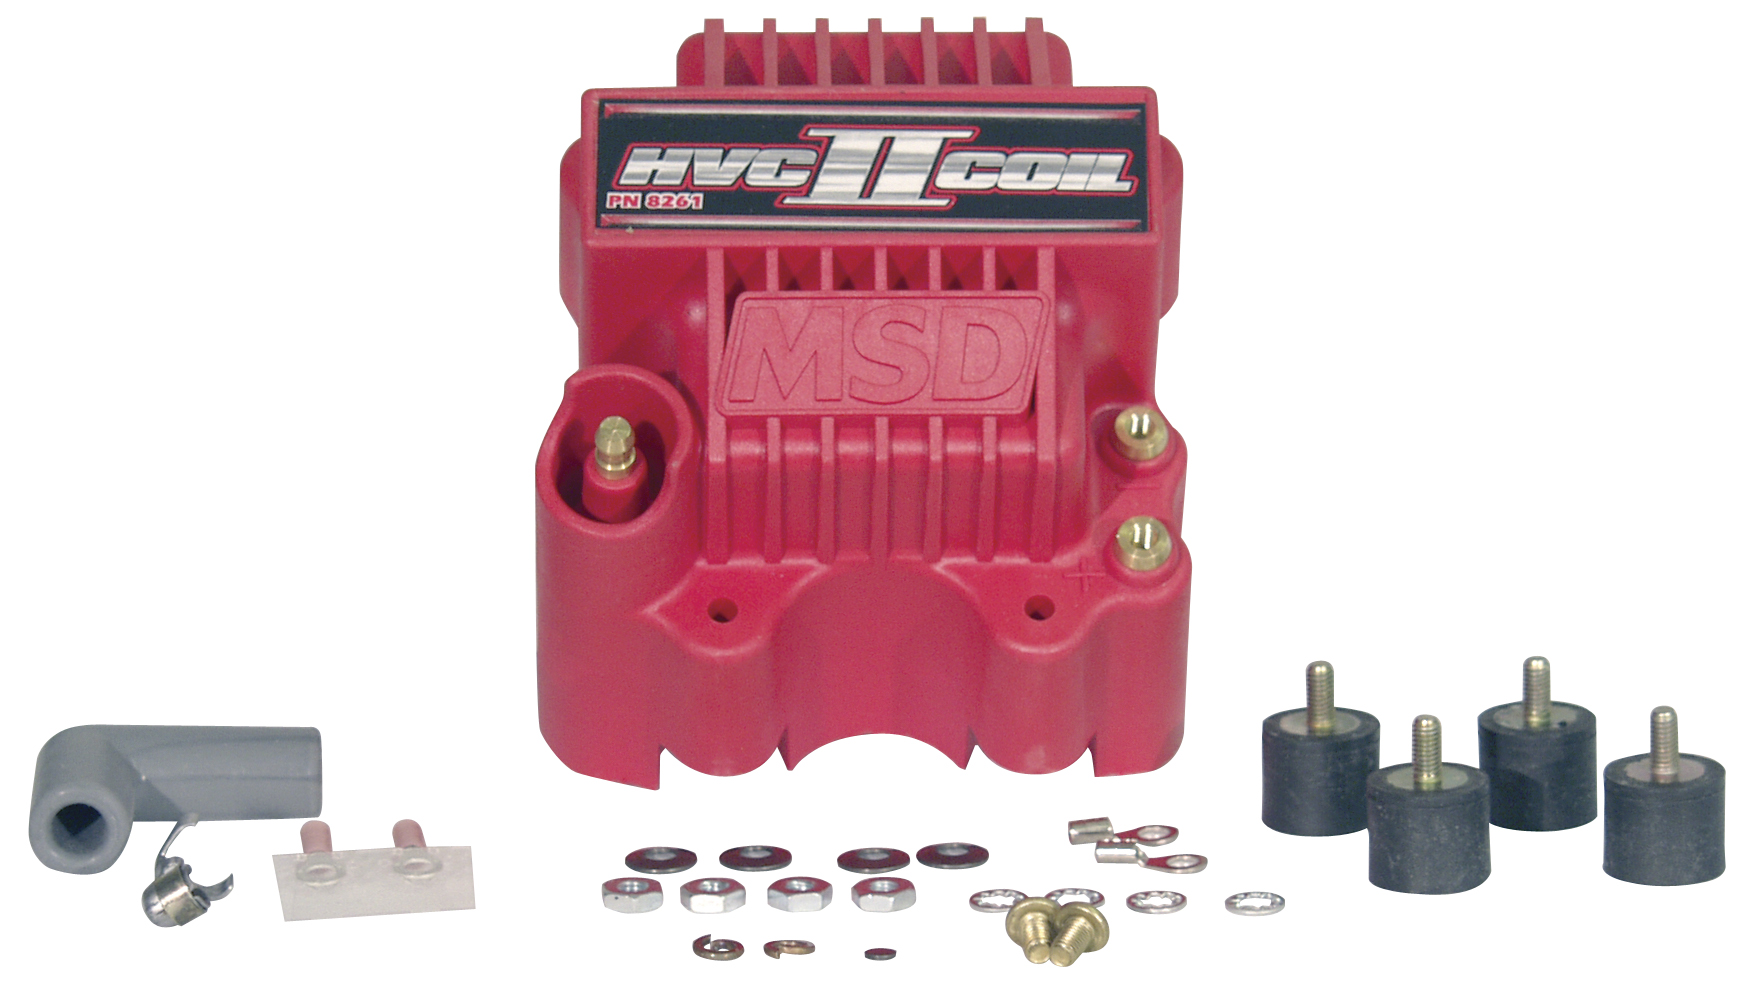 works with MSD 6 Series Units MSD Ignition Coil Blaster HVC